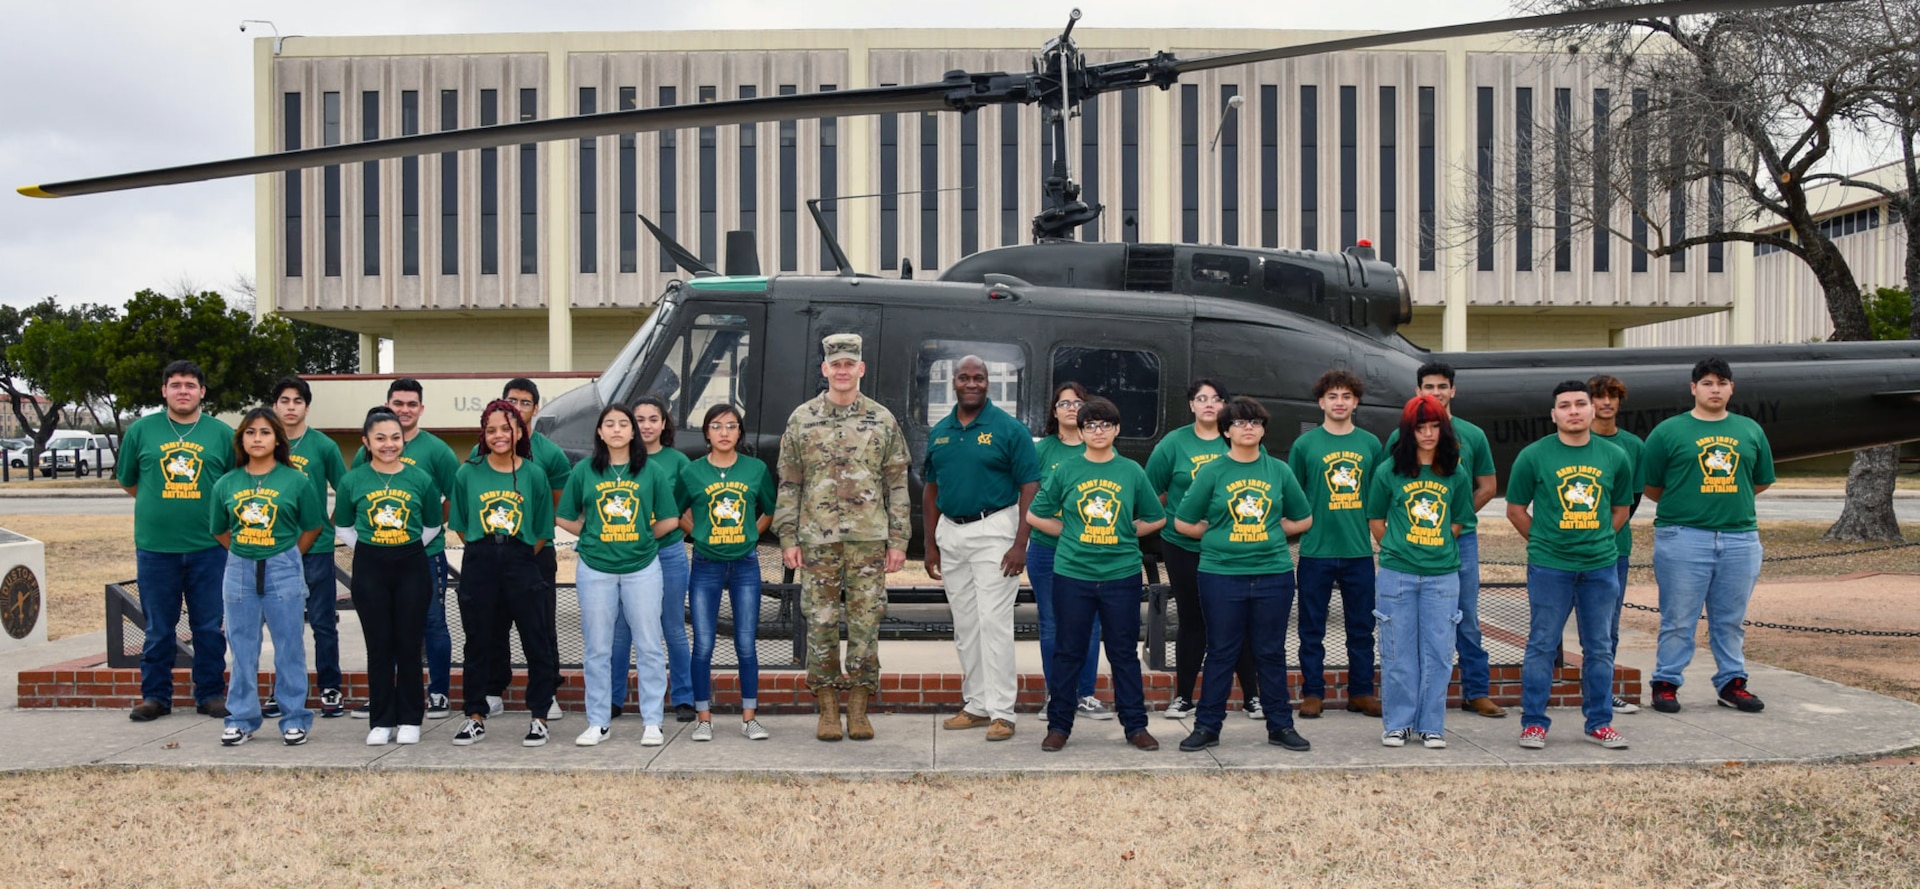 U.S. Army Medical Center of Excellence resumes high school tours